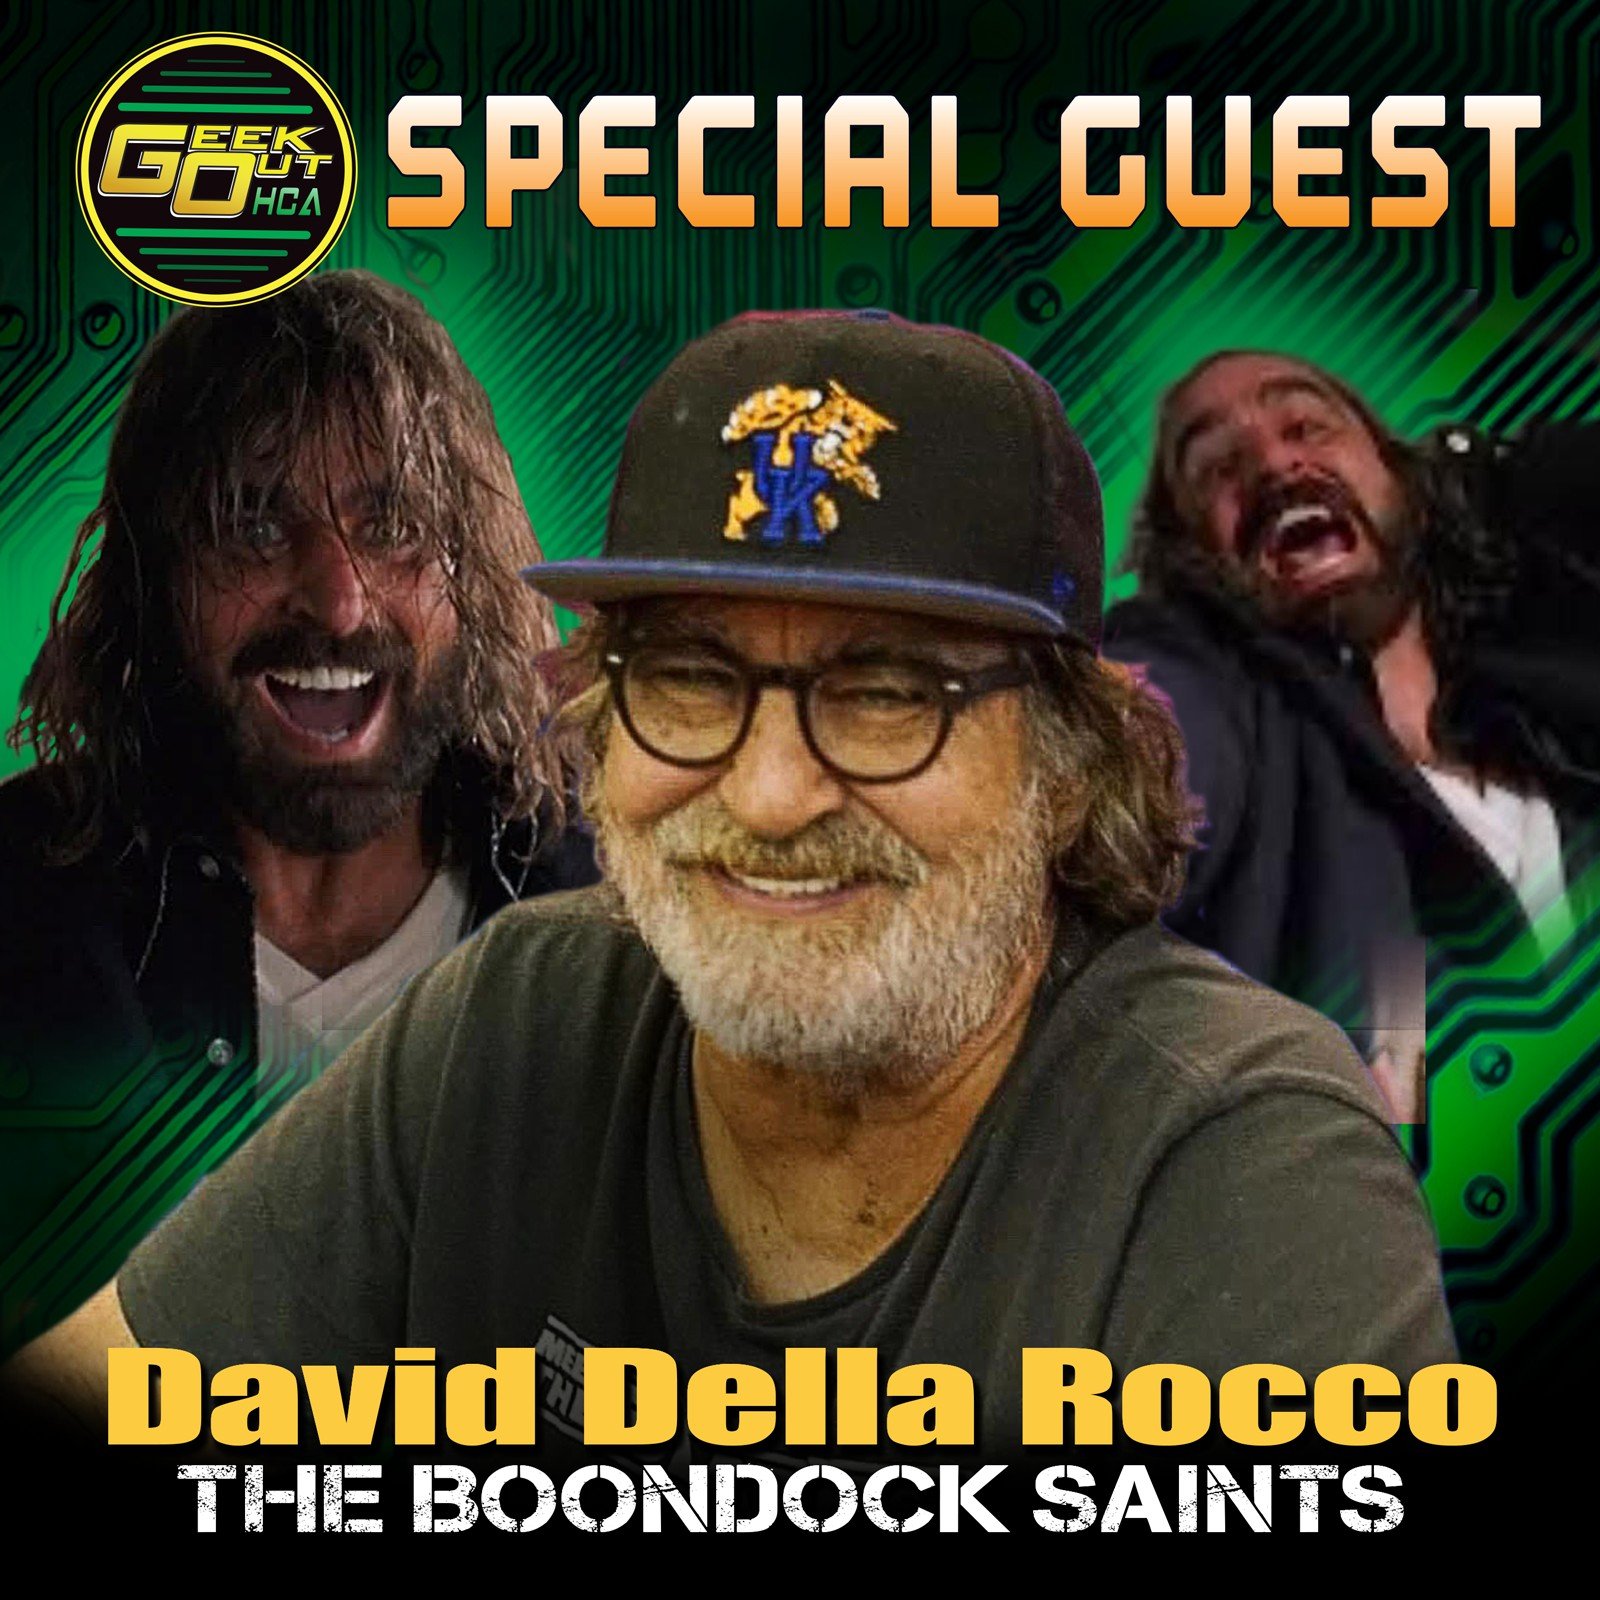   SPECIAL GUEST ANNOUNCEMENT  David Della Rocco will be joining us this year!! We are super GEEKED that this legend will be making his way out to camp to hang out with us! Be sure to catch his meet and greets in the pavilion on Friday and Saturday, o